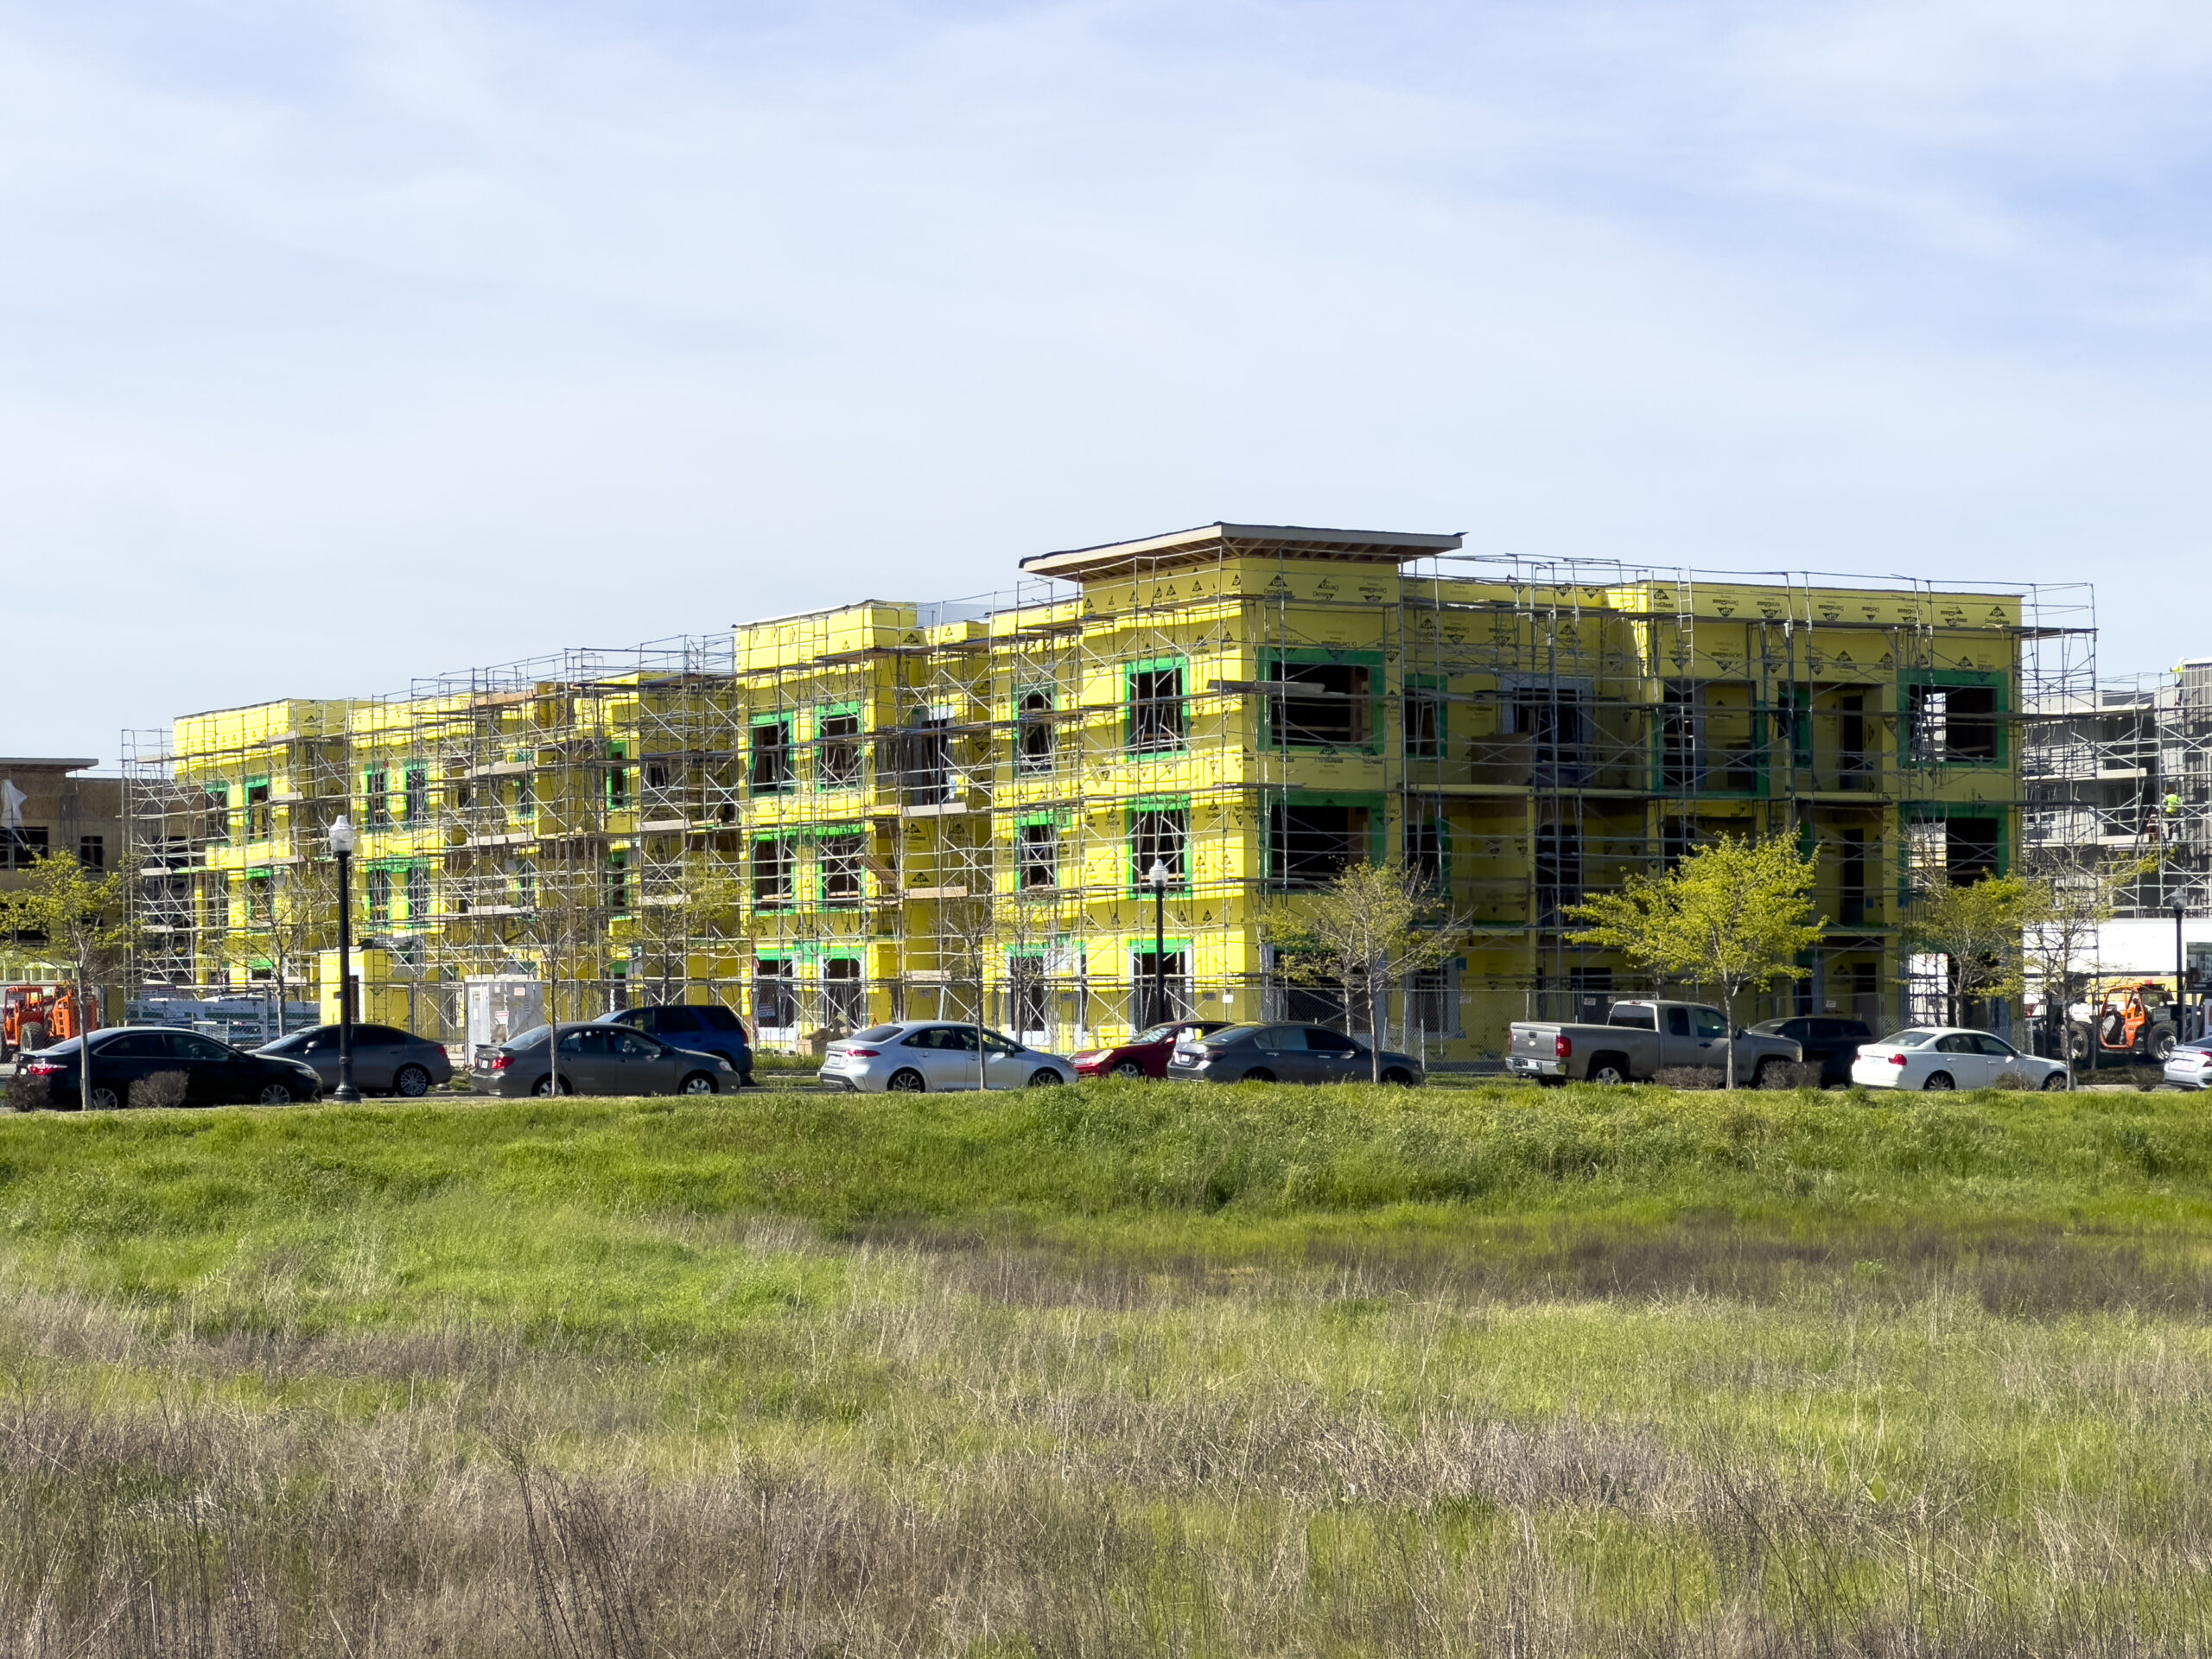 Township 9 townhomes seen from Richards Boulevard, image by author